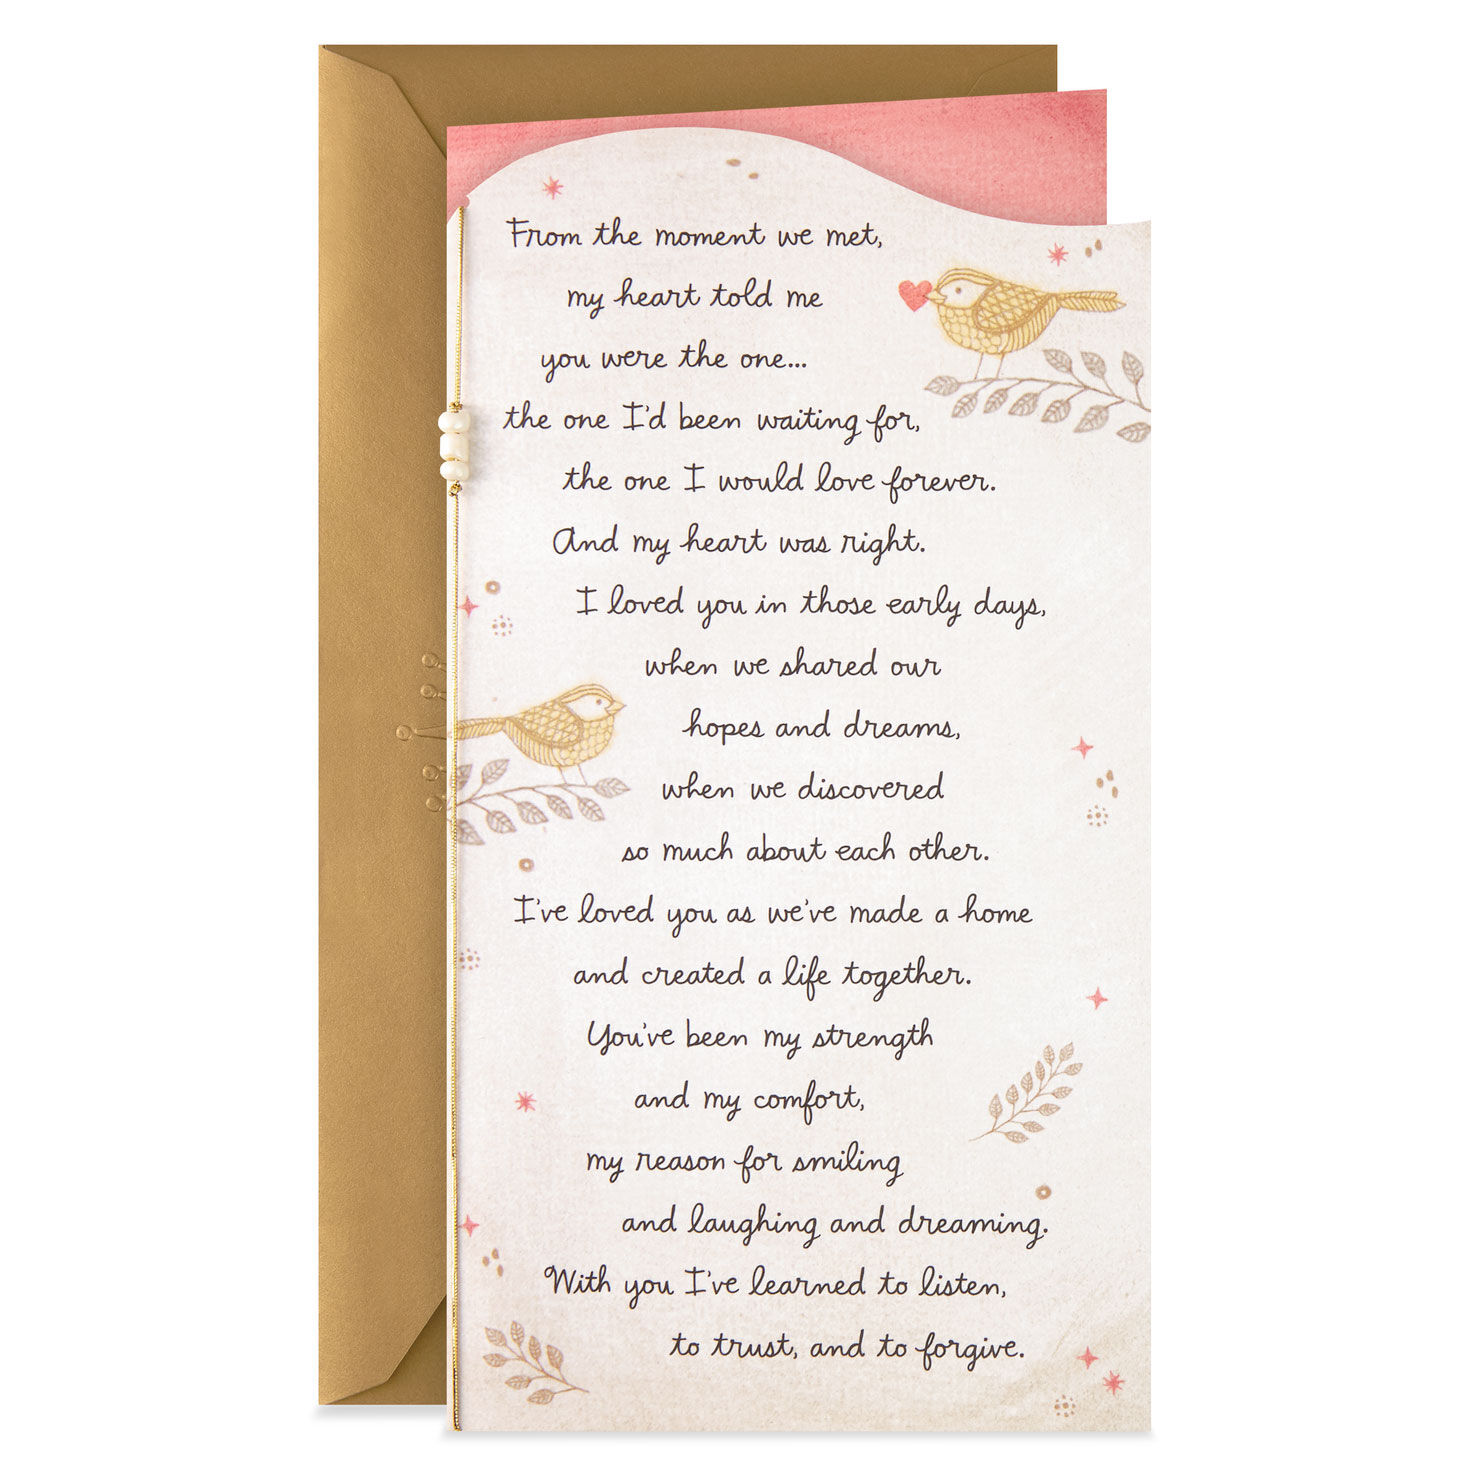 You're Still the One Valentine's Day Card for only USD 4.99 | Hallmark